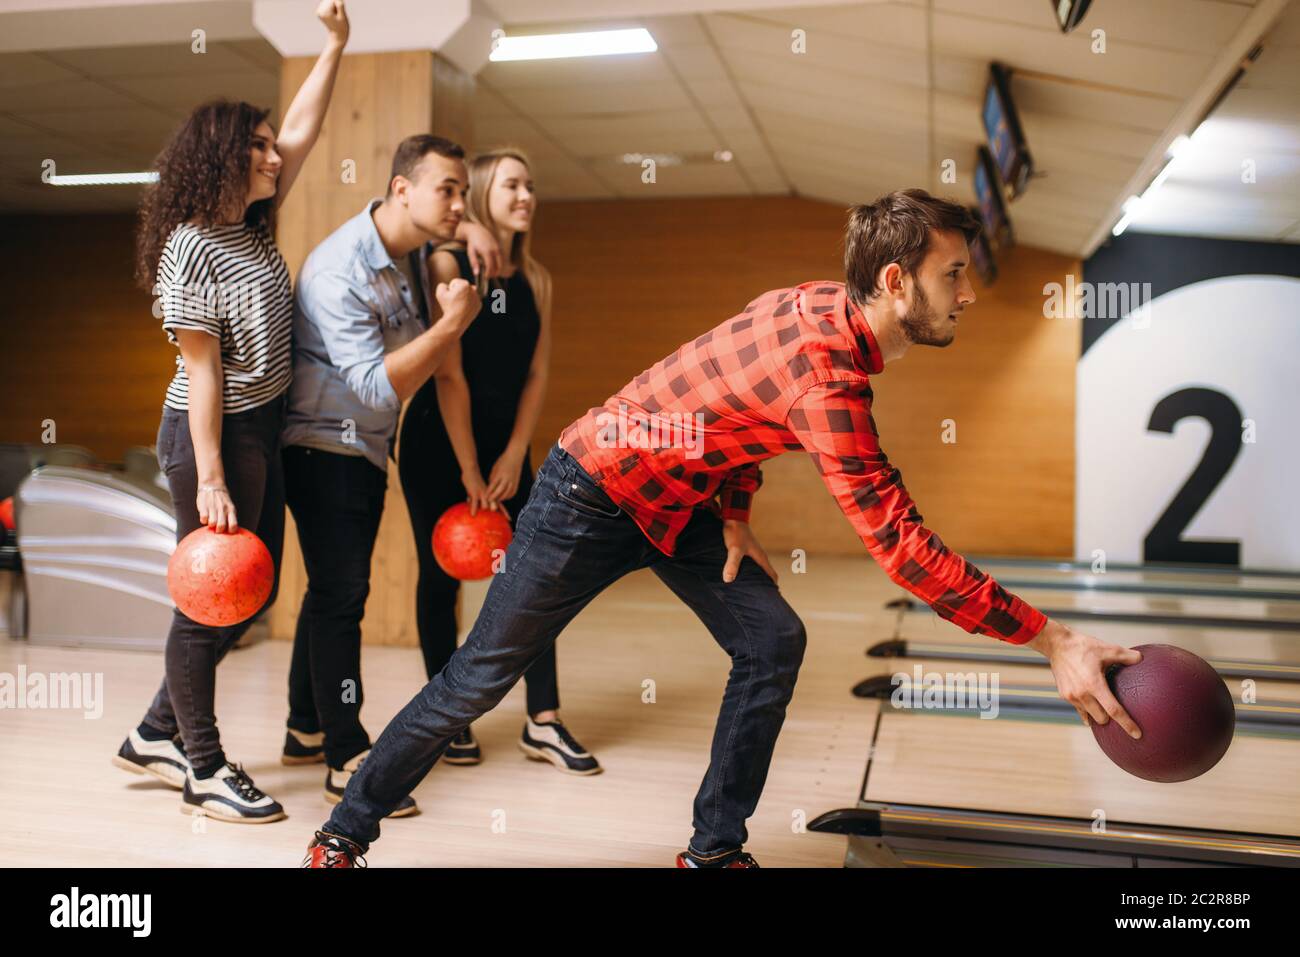 Male bowler throws ball on lane, front view, throwing in action. Bowling alley teams playing the game in club, active leisure Stock Photo